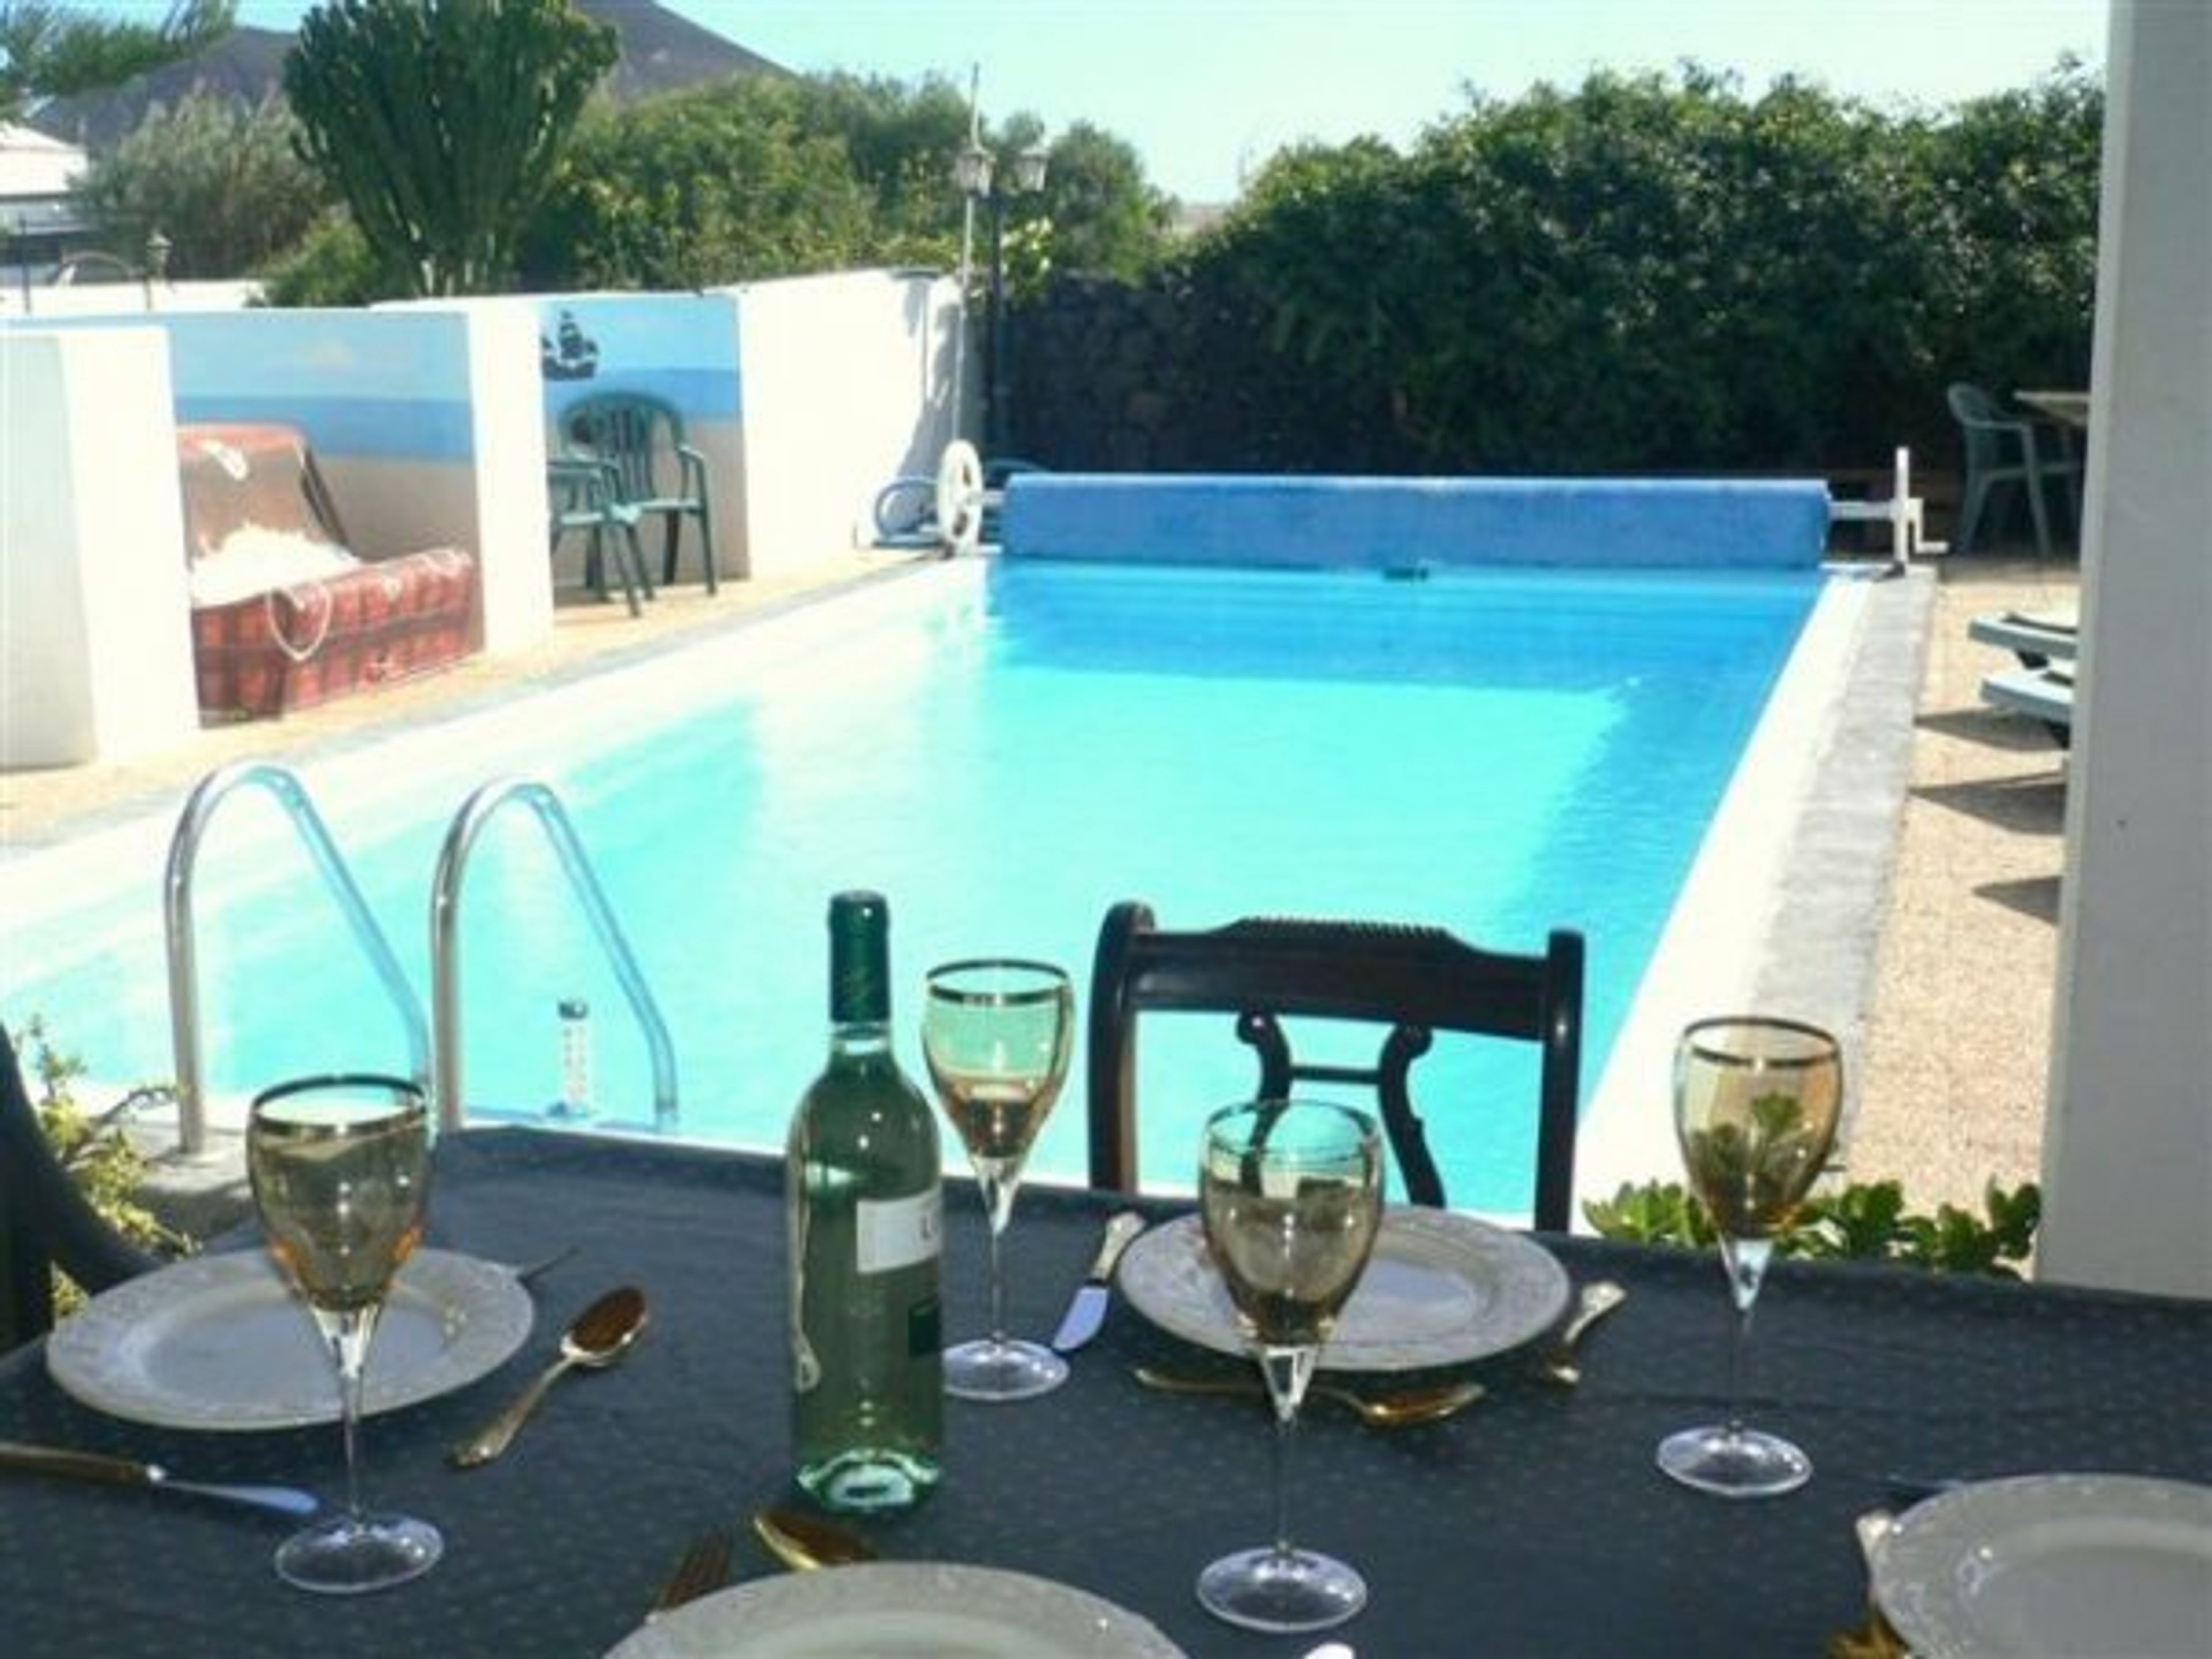 Chilled wine & Lunch, Overlooking the Pool.